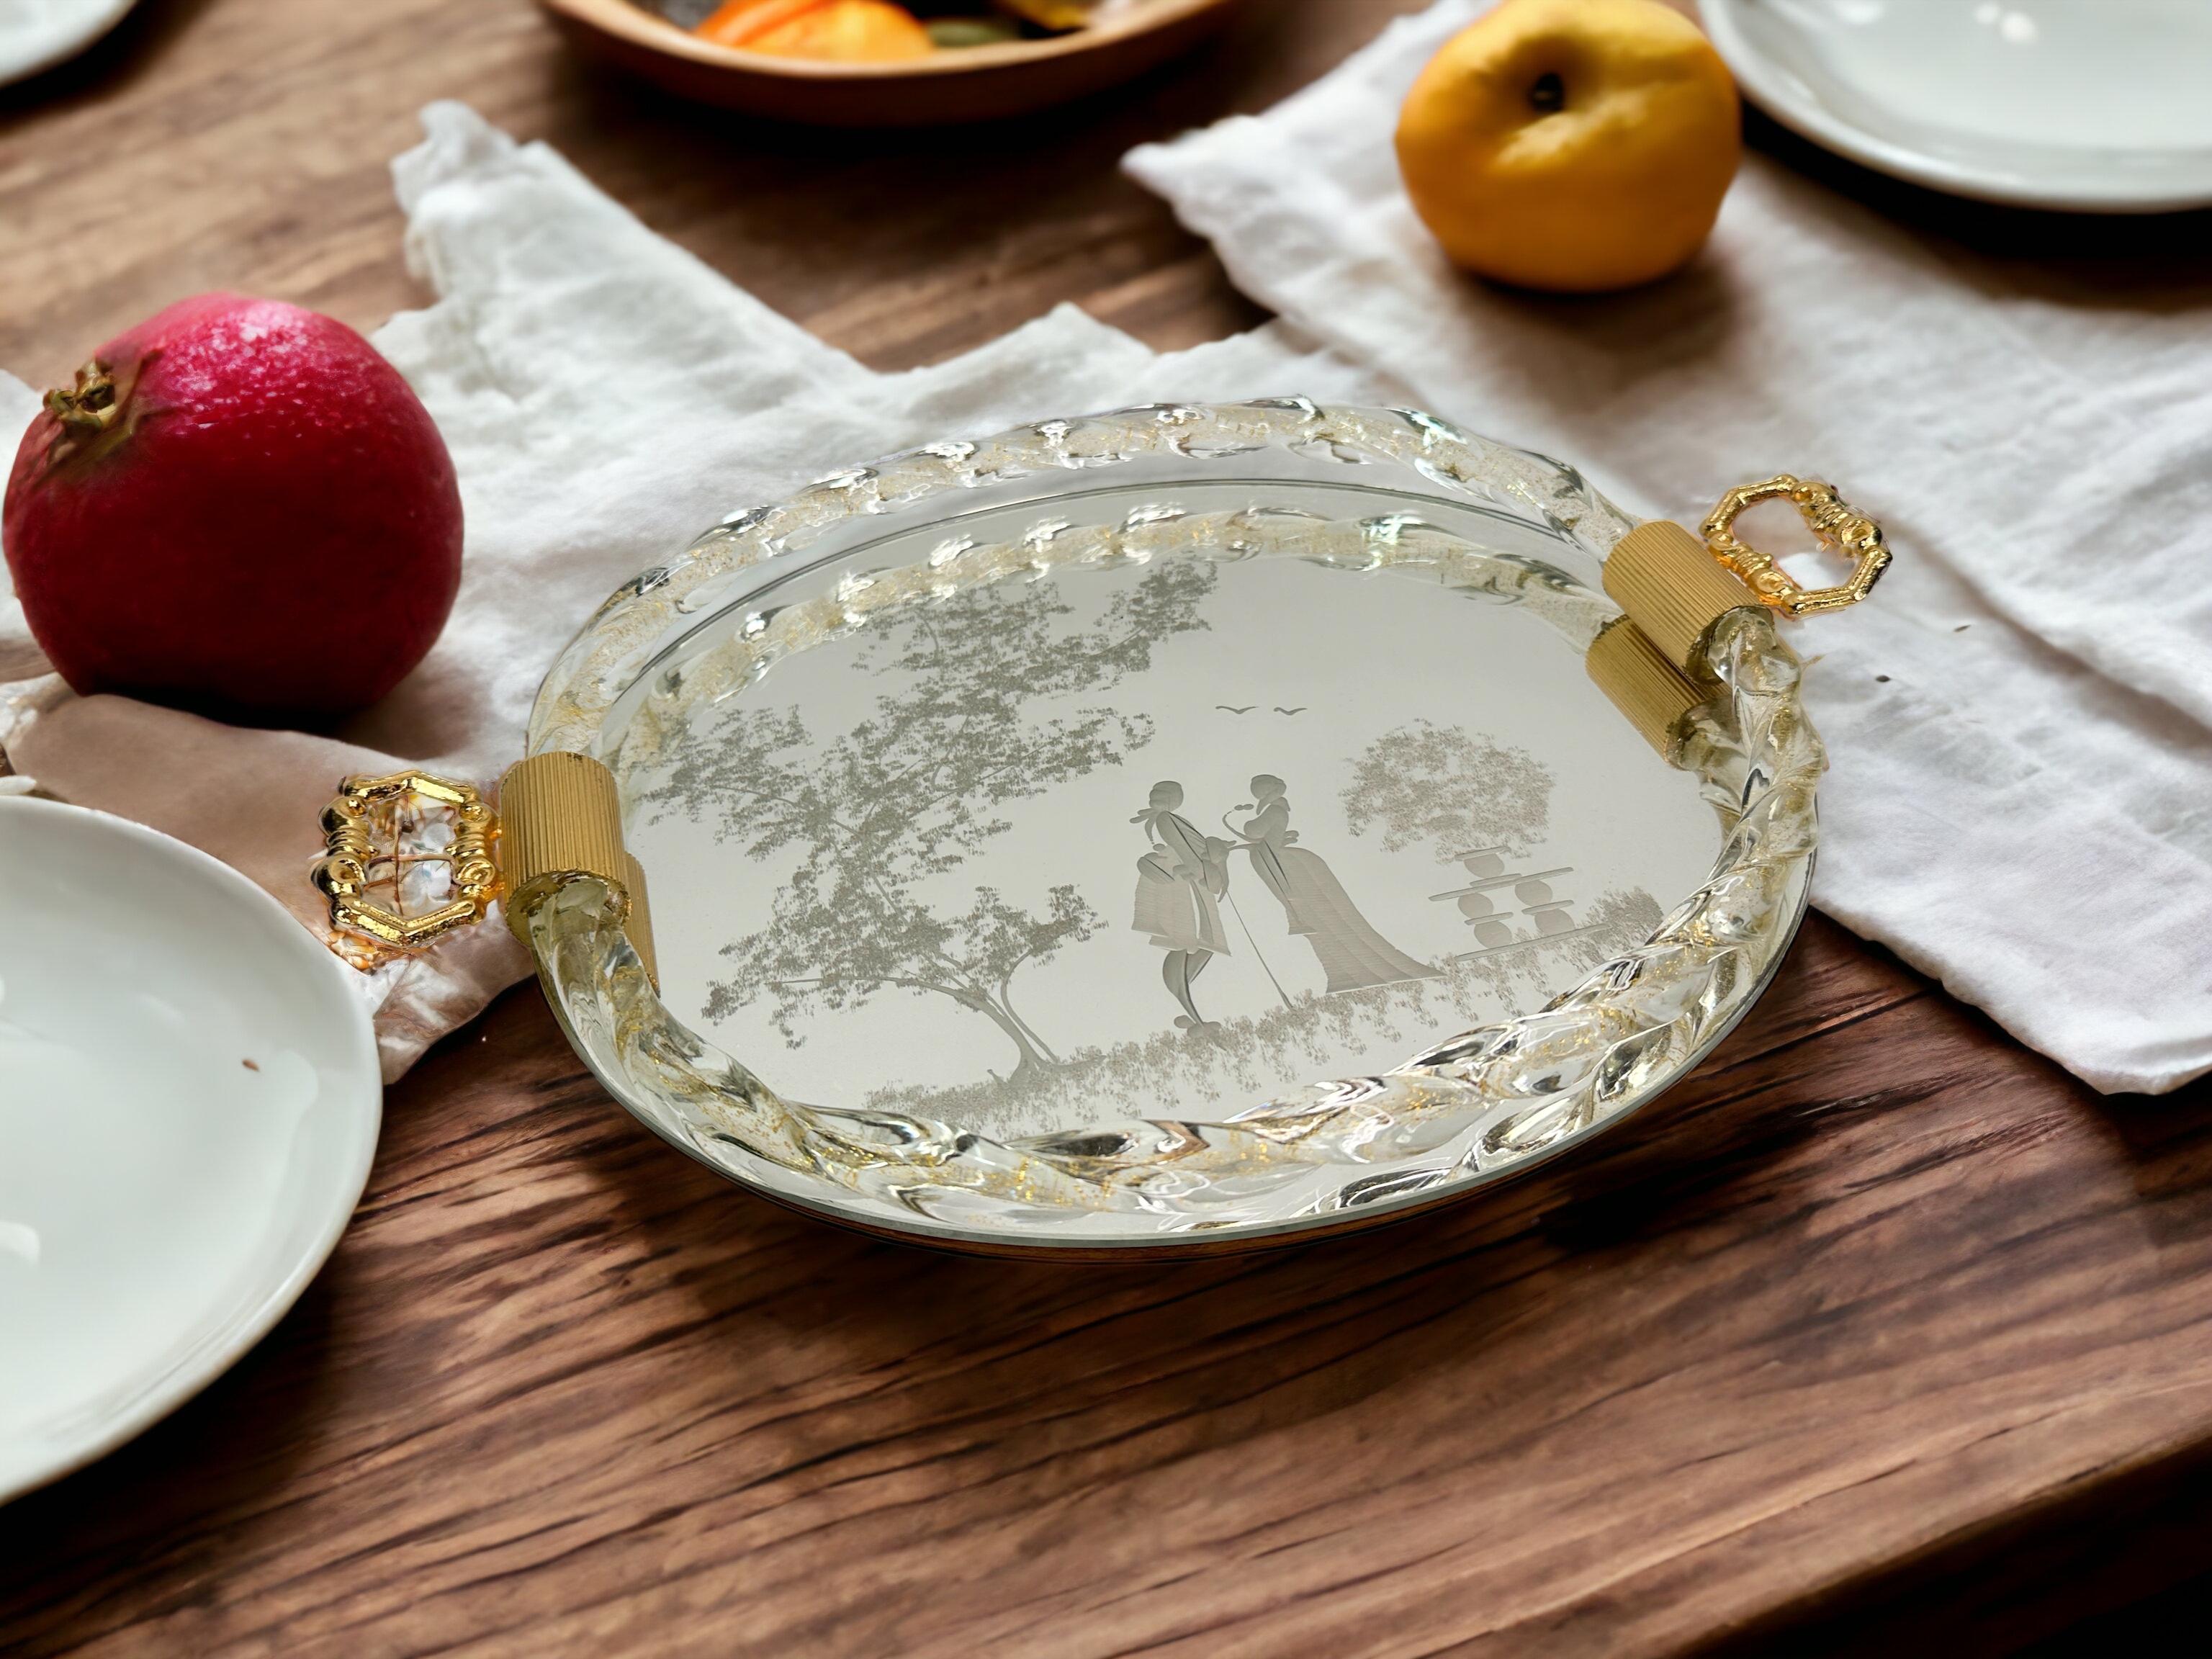 Created by Ercole Barovier, this piece is a beautiful Italian serving or vanity table tray edged in Murano glass rope that is embedded with clear gold flakes. Done in the style of Luigi Brusotti and Gio Ponti, the mirror is etched with Venetian